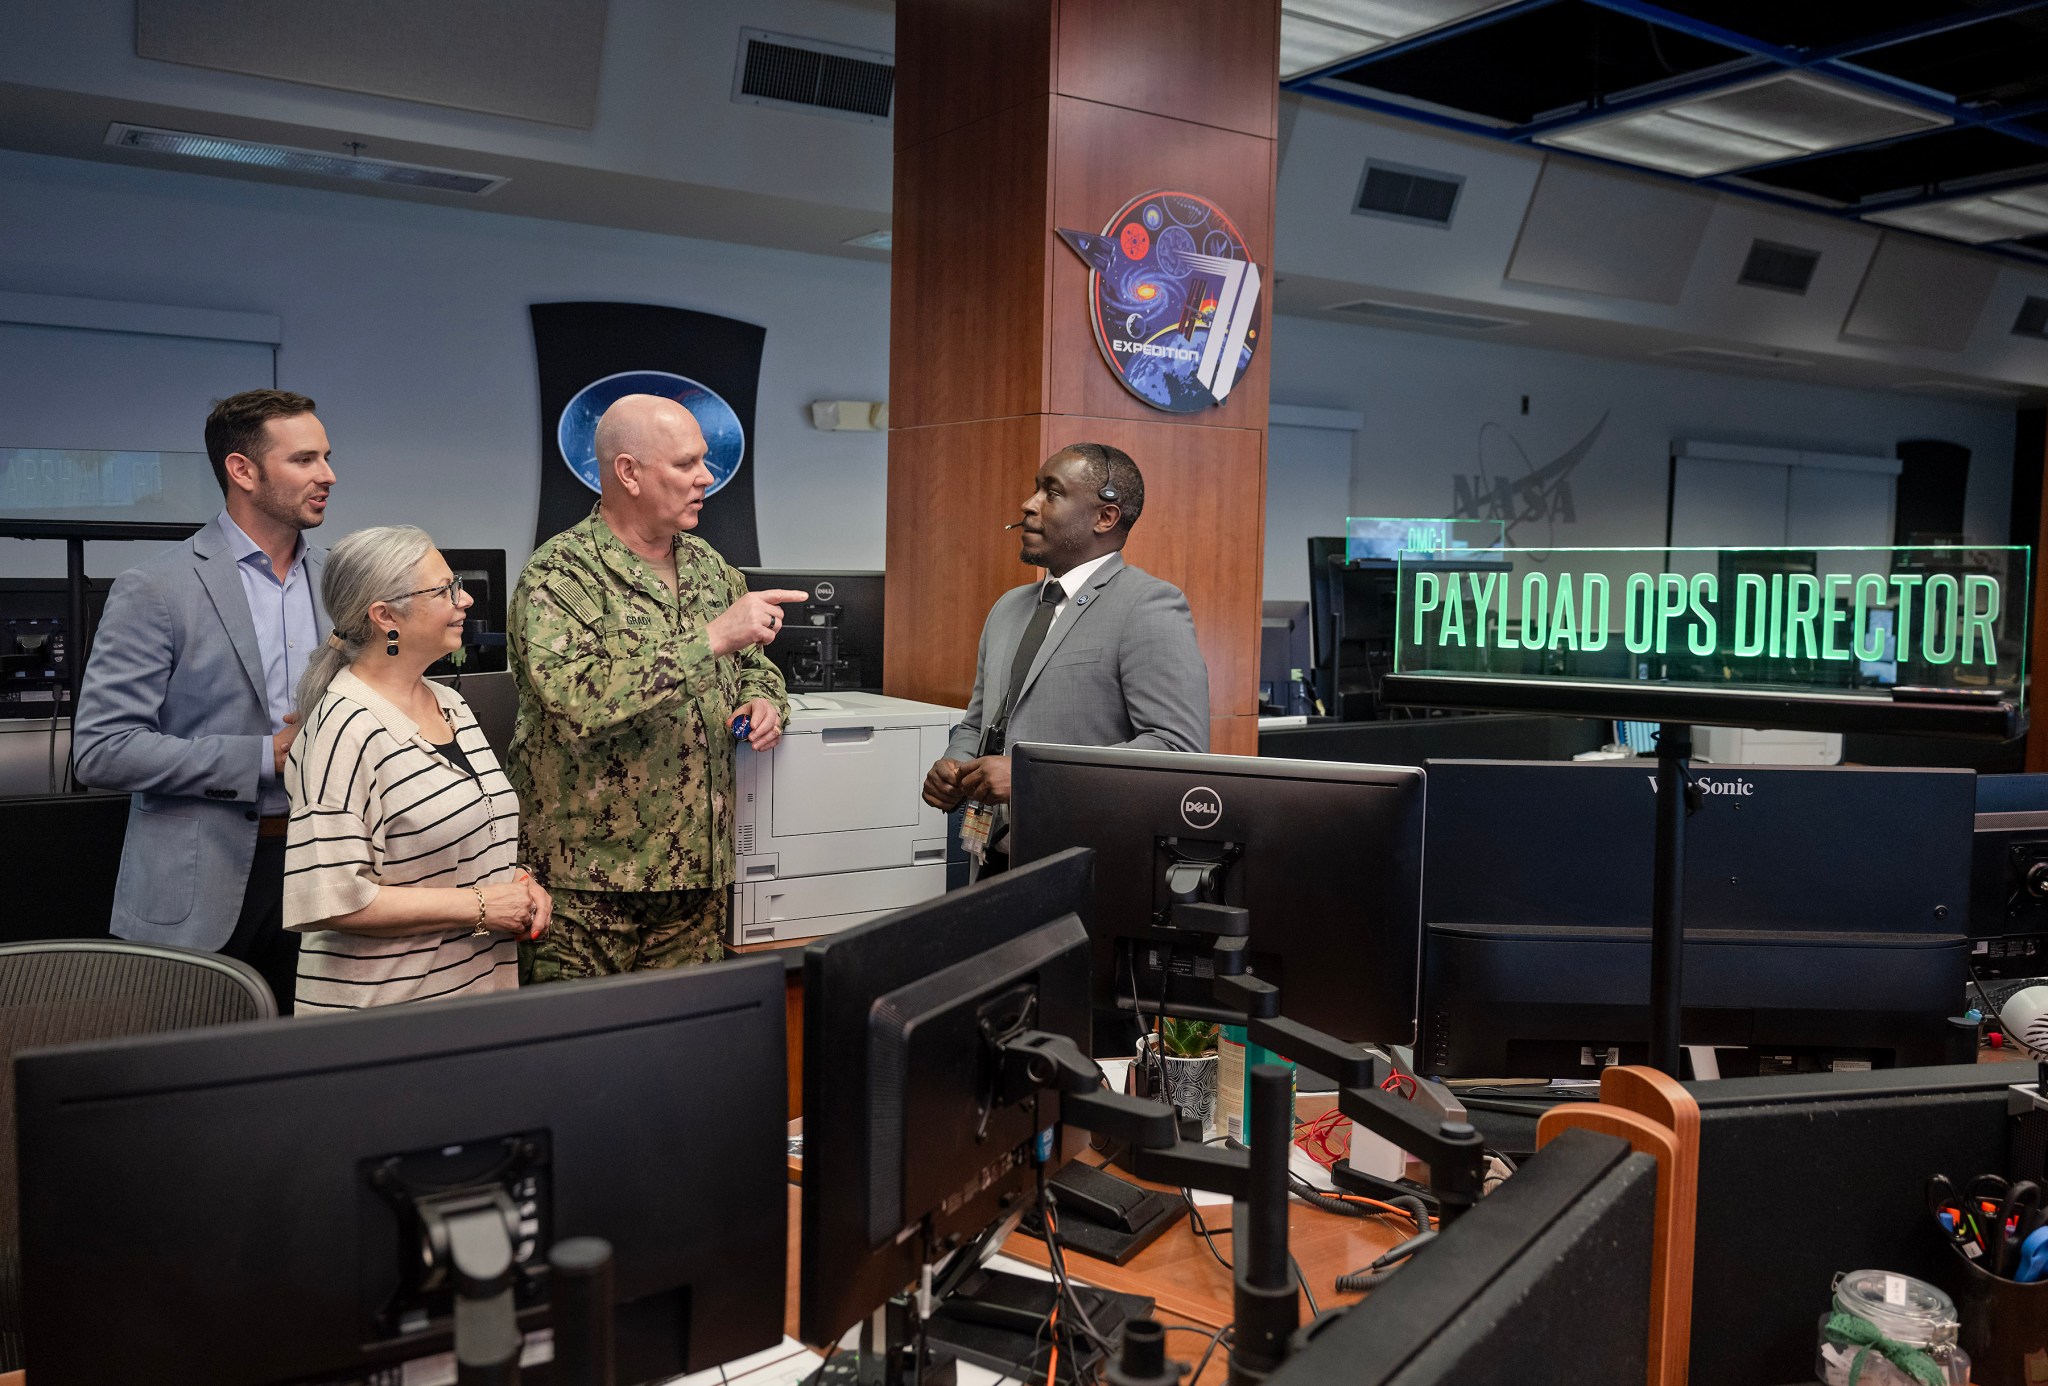 Navy Adm. Christopher Grady, vice chairman of the Joint Chiefs of Staff, his wife Christine Grady, and son Luke Grady talk with Nick Benjamin, right, a payload operations director for the International Space Station, at the Payload Operations Integration Center during the vice chairman’s tour of NASA’s Marshall Space Flight Center on May 6.